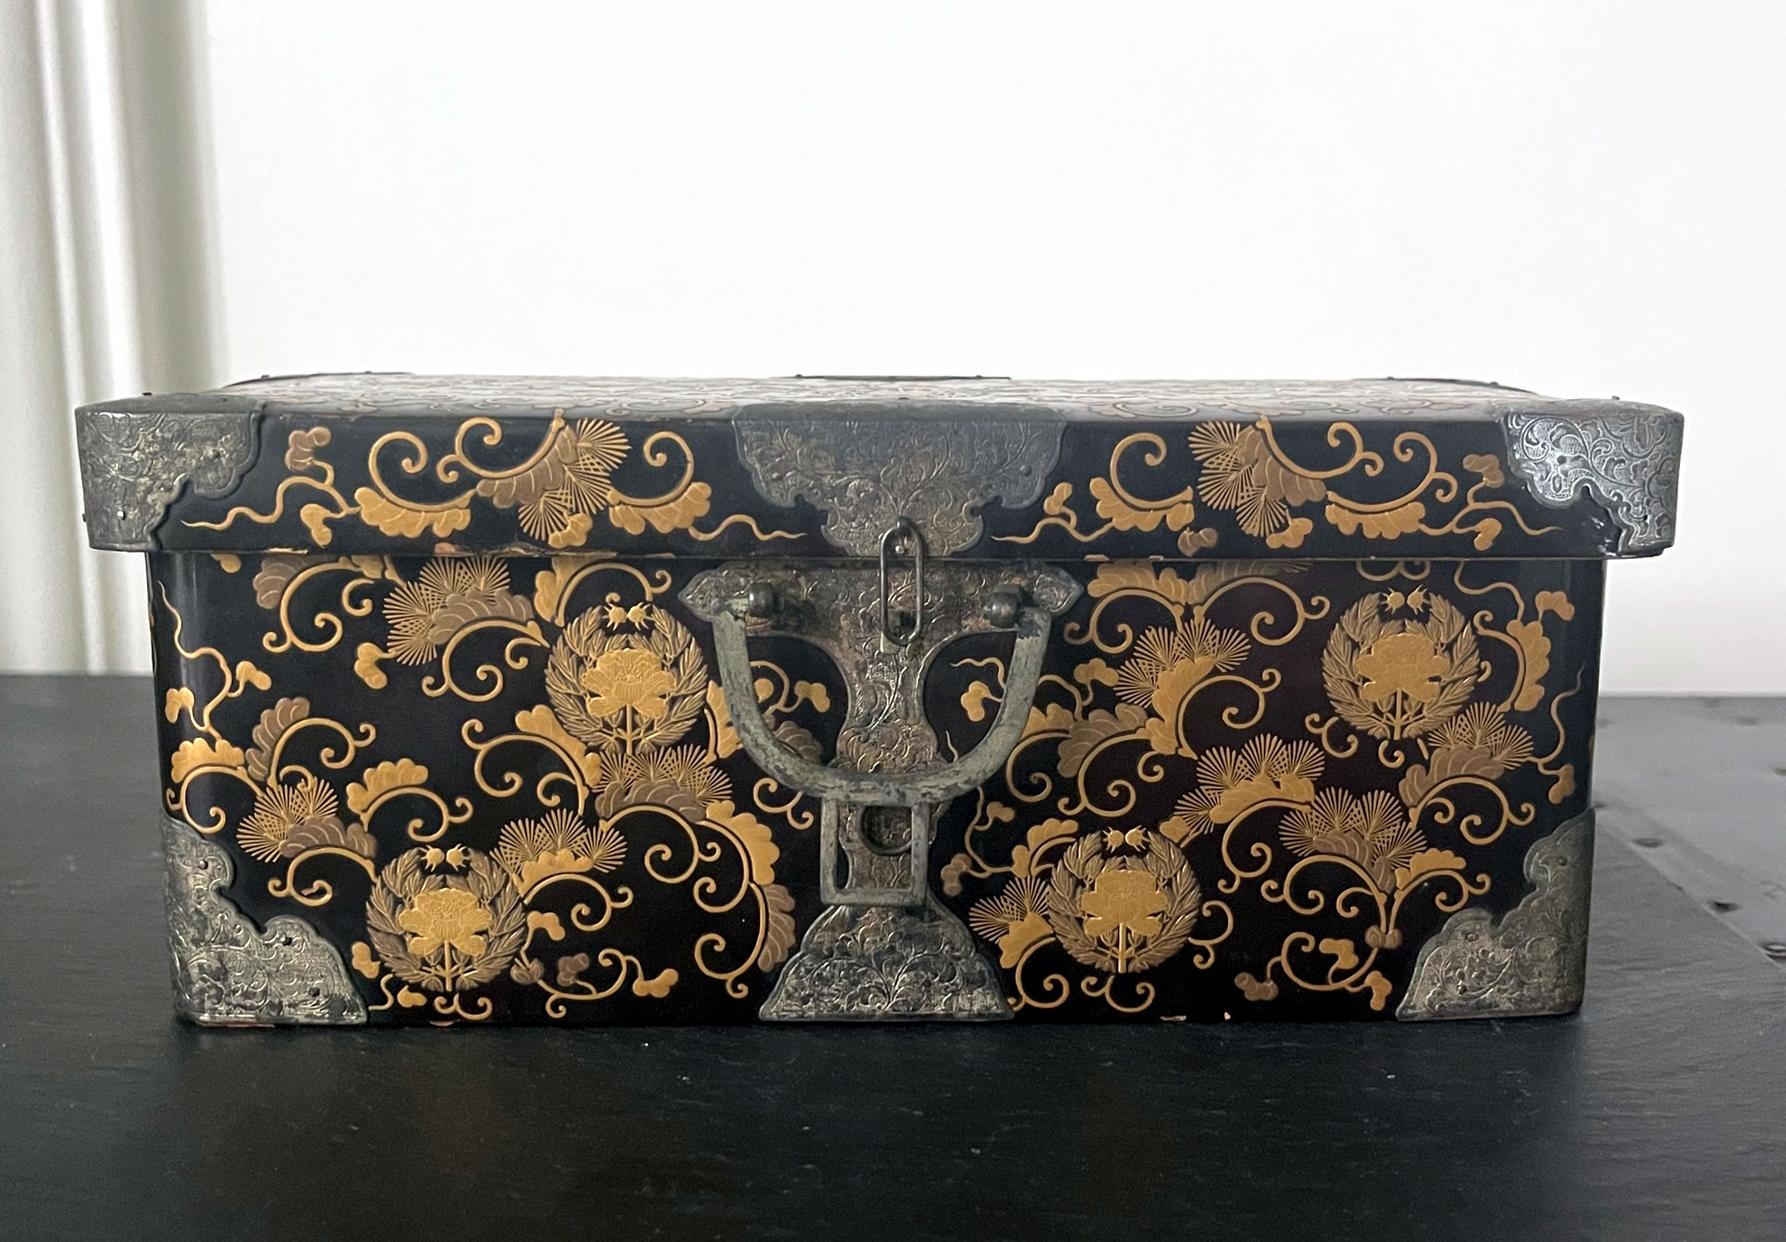 A Japanese lacquered box with lid in the shape of a miniature Hasami-Bako (traveling chest) circa late 18 to early 19th century of the Edo period. The black box is decorated with fine golden hiramaki-e painting of scrolling vines, pine needles and